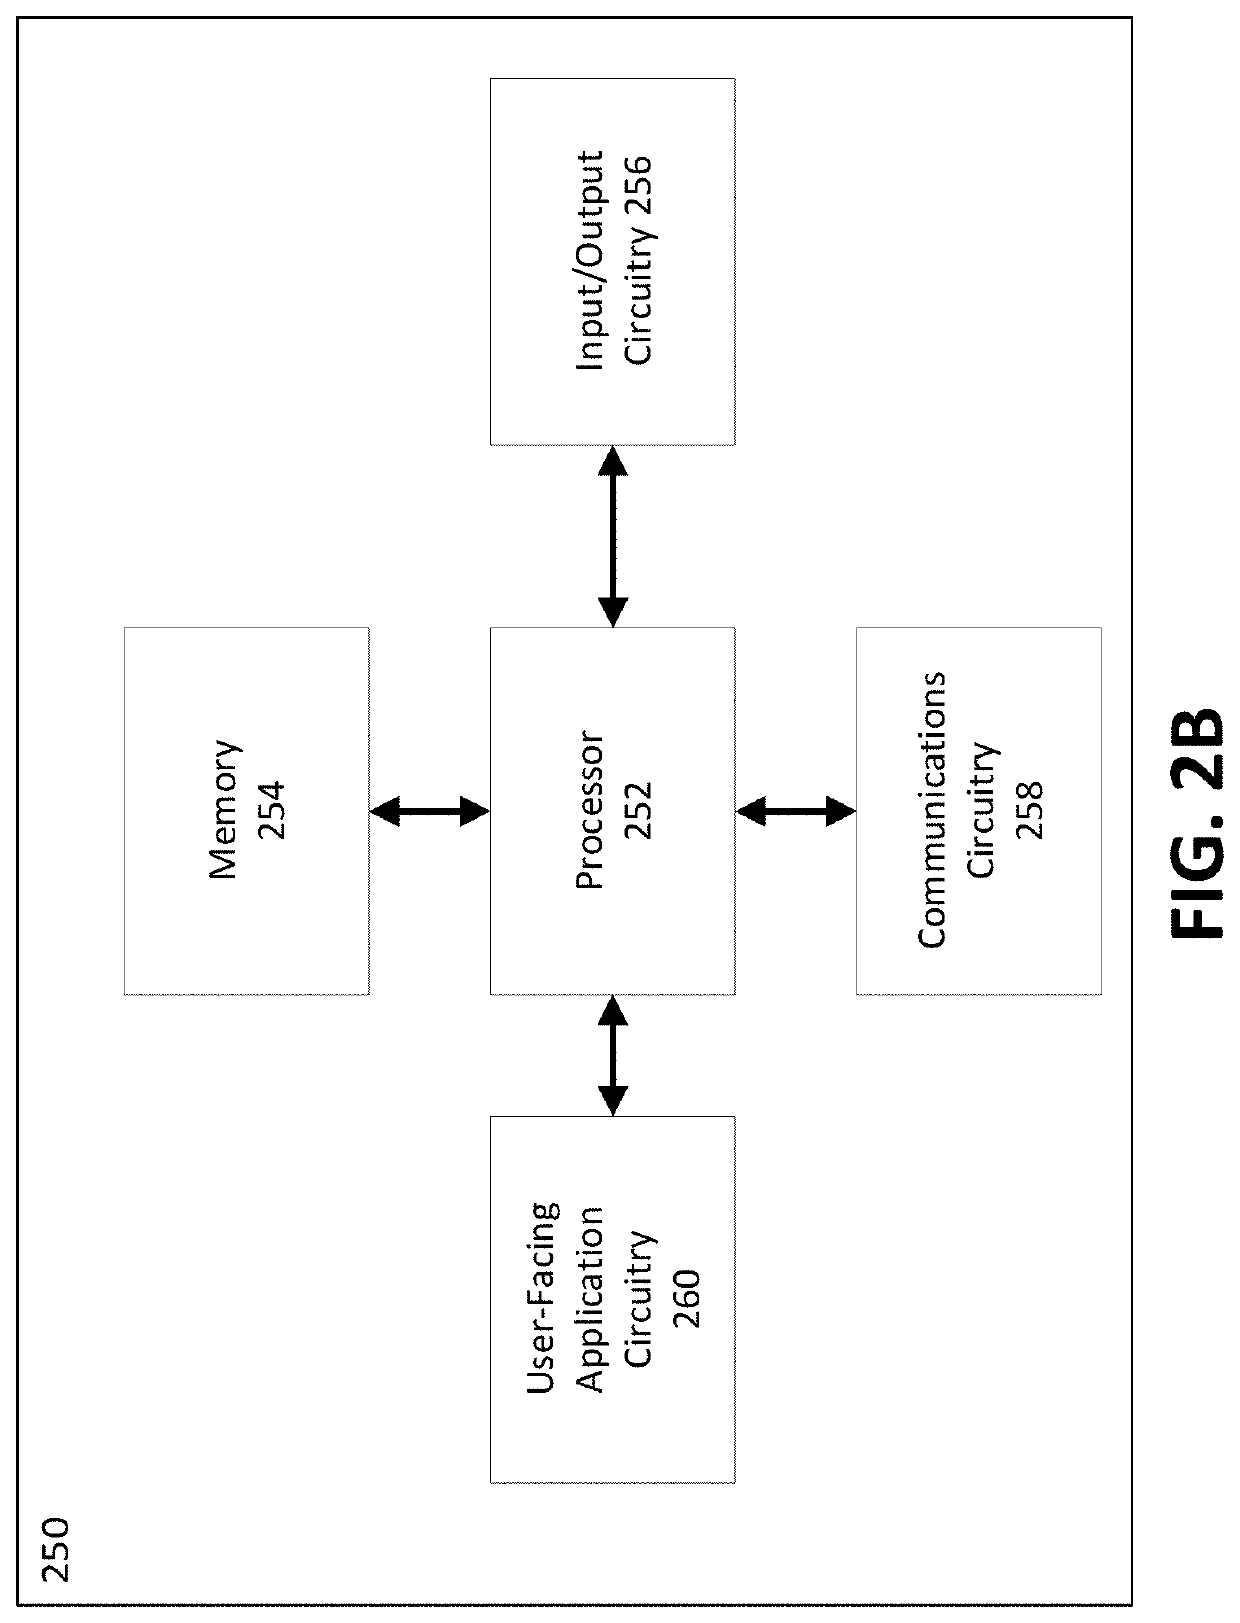 System, method, and computer program product for improved embedded application data management